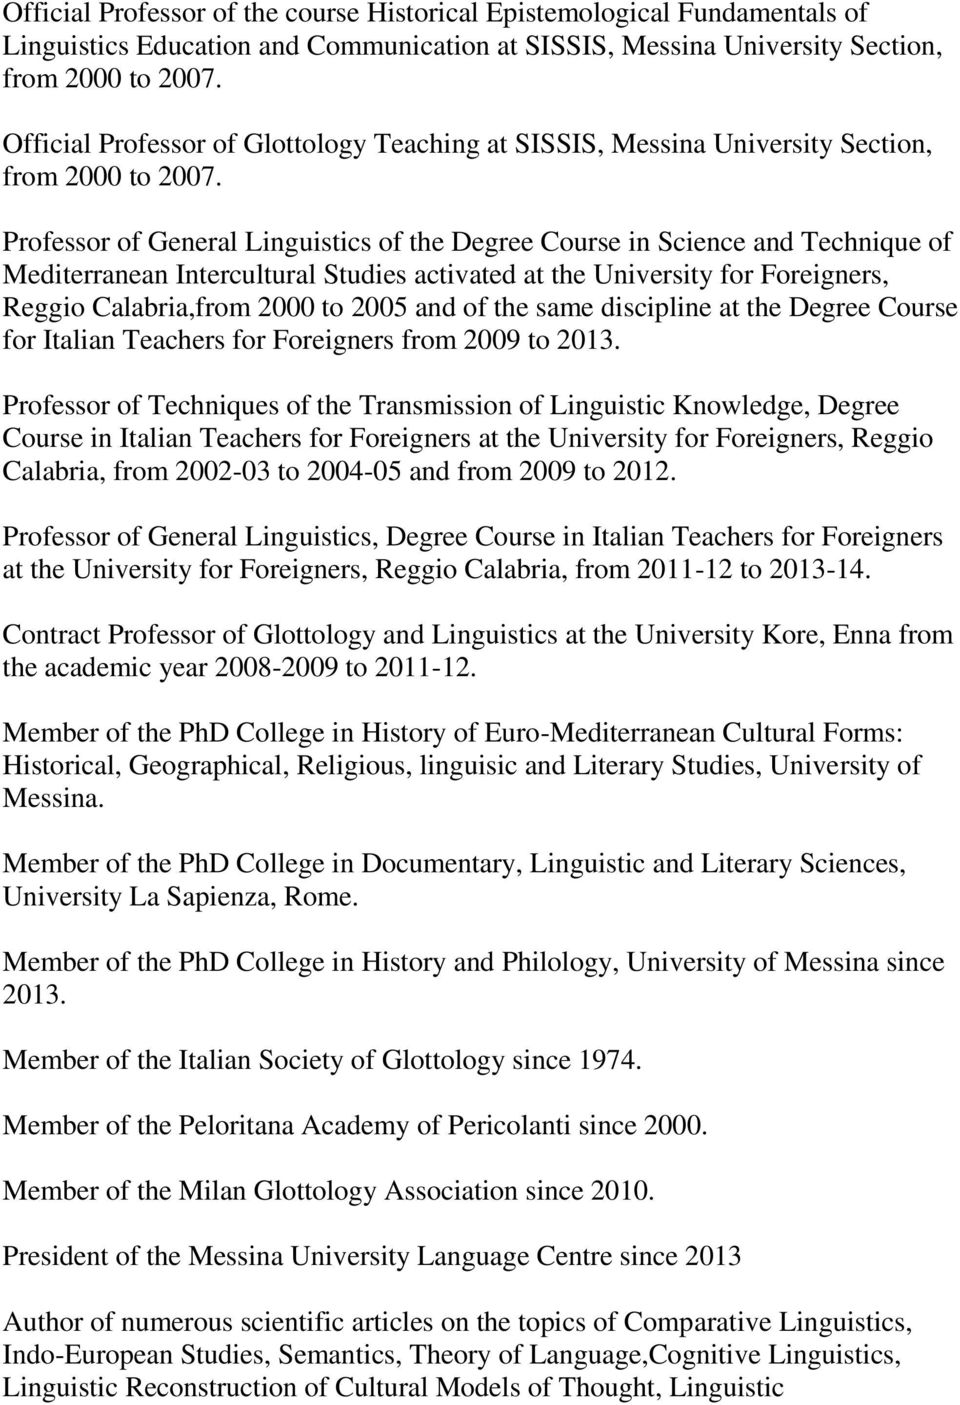 Professor of General Linguistics of the Degree Course in Science and Technique of Mediterranean Intercultural Studies activated at the University for Foreigners, Reggio Calabria,from 2000 to 2005 and